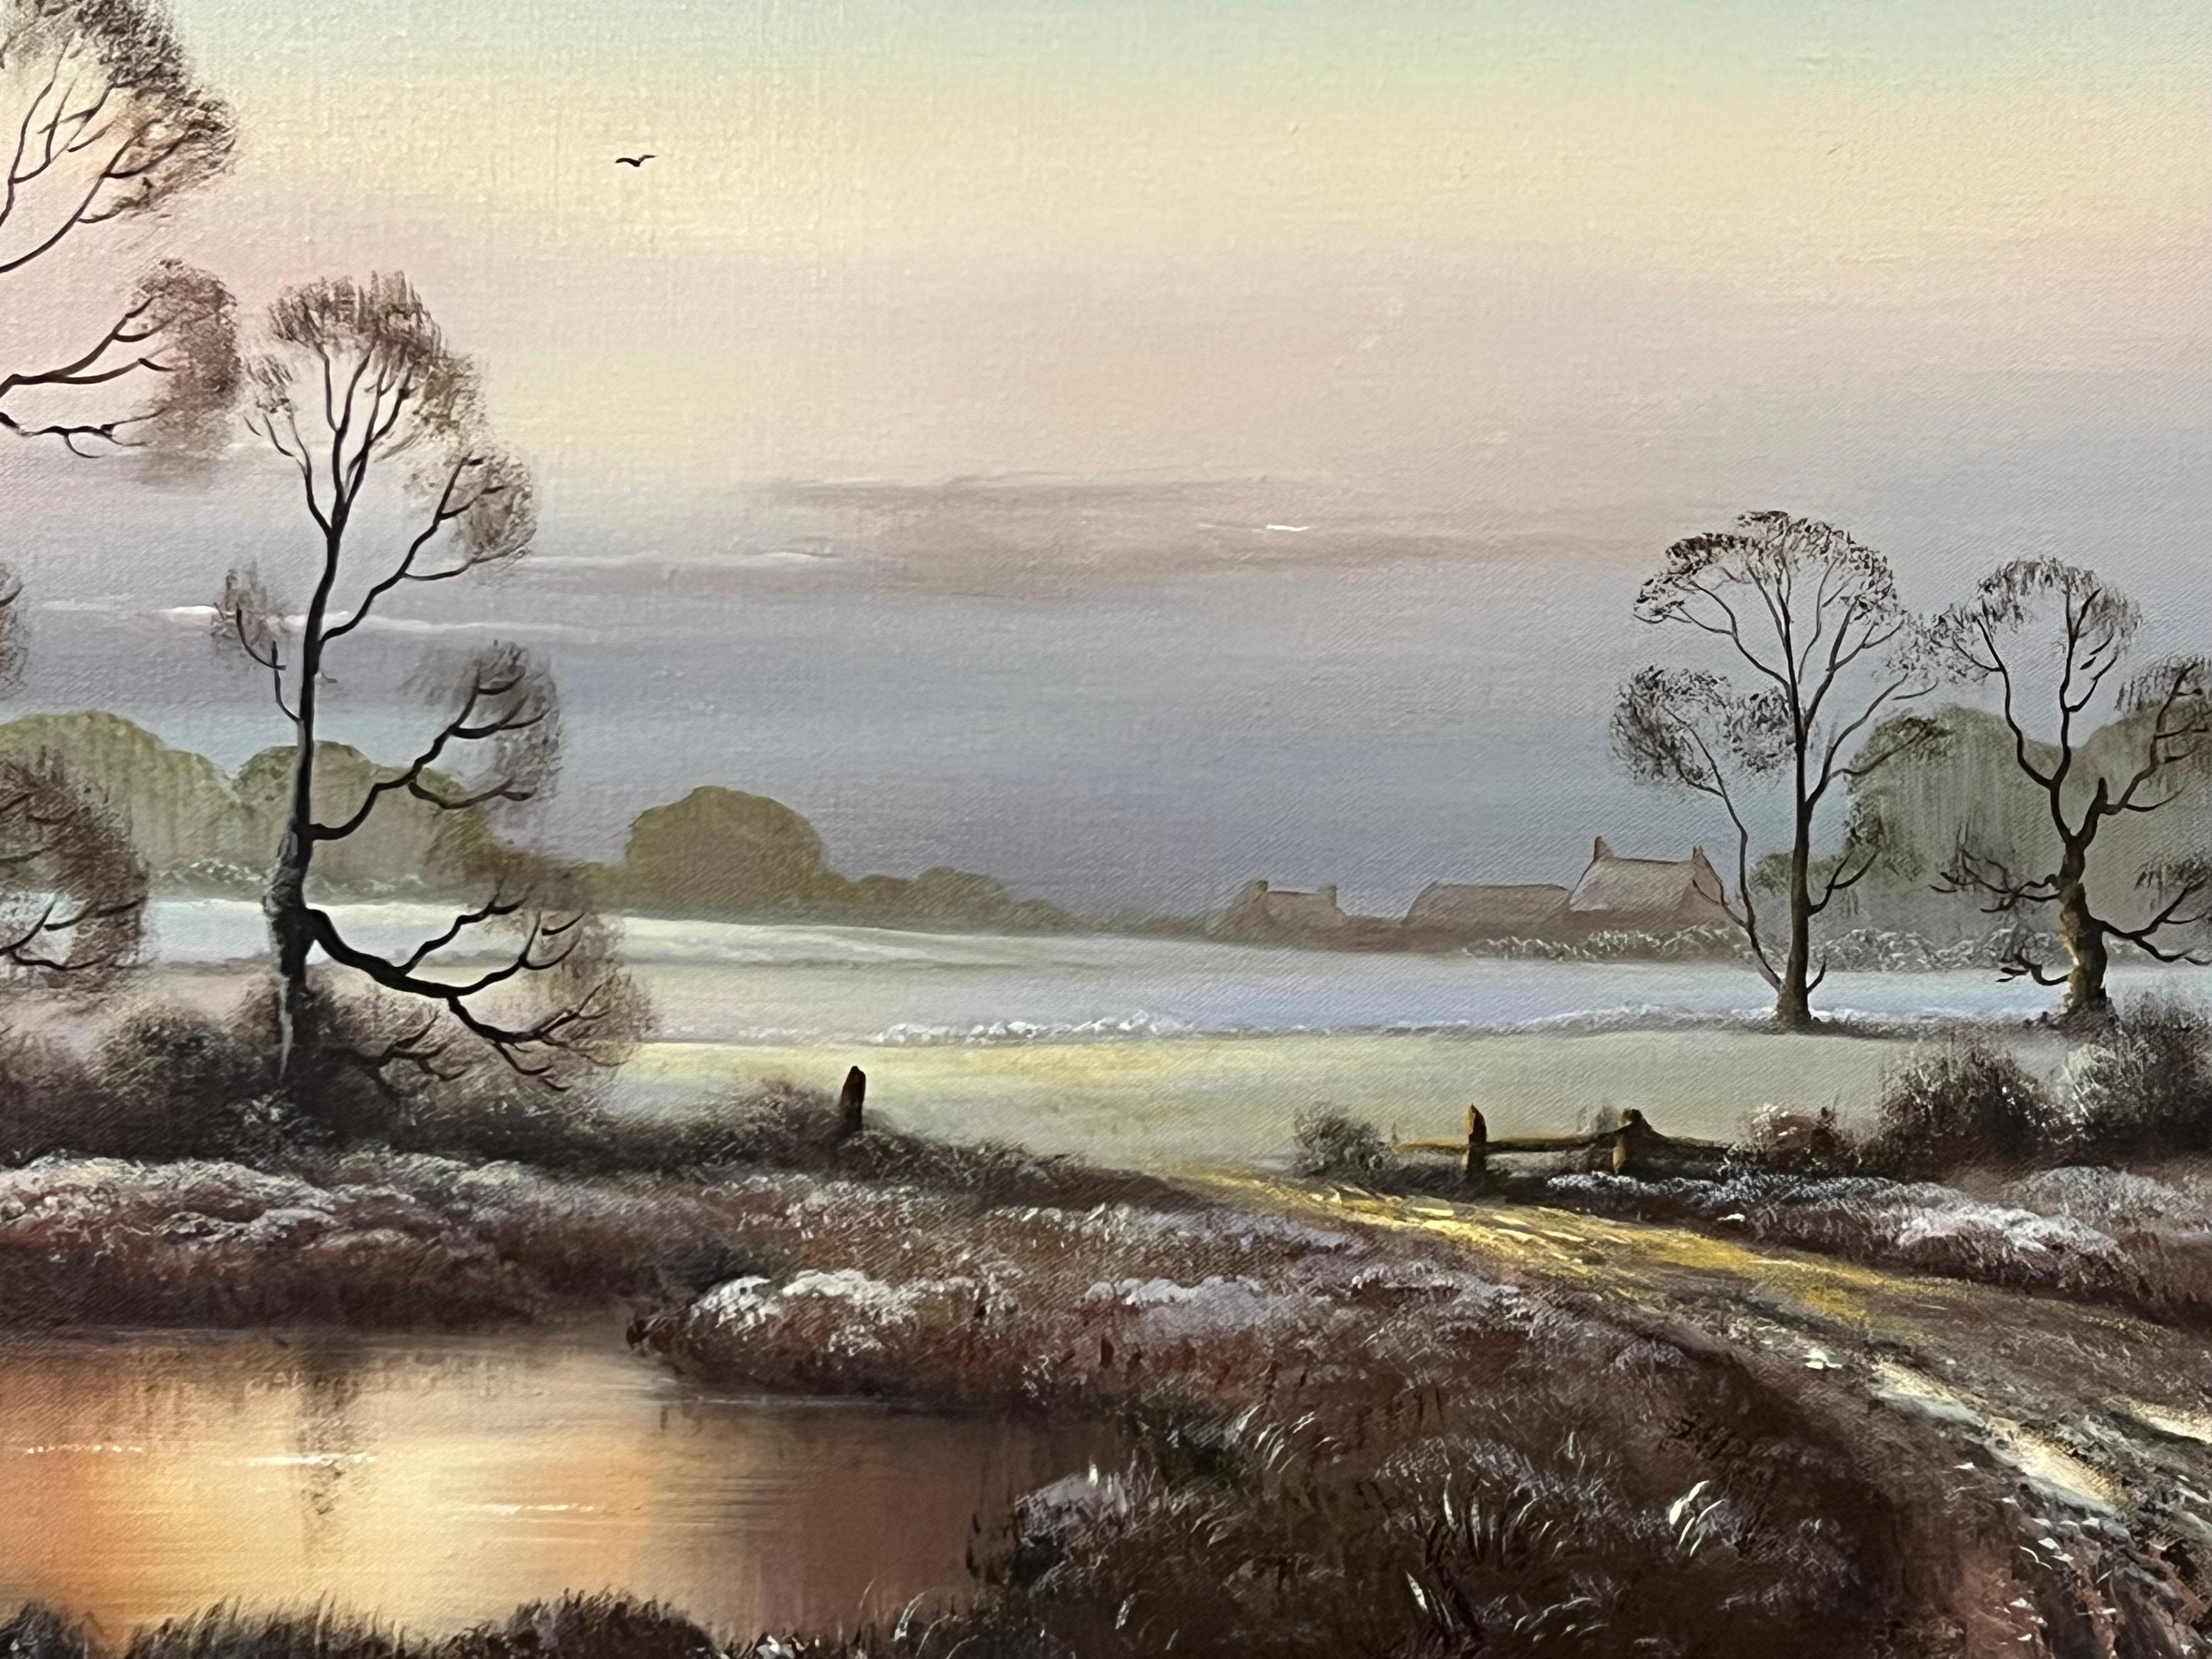 The Winter Mist at a Farm in the English Countryside by 20th Century British Artist im Angebot 10